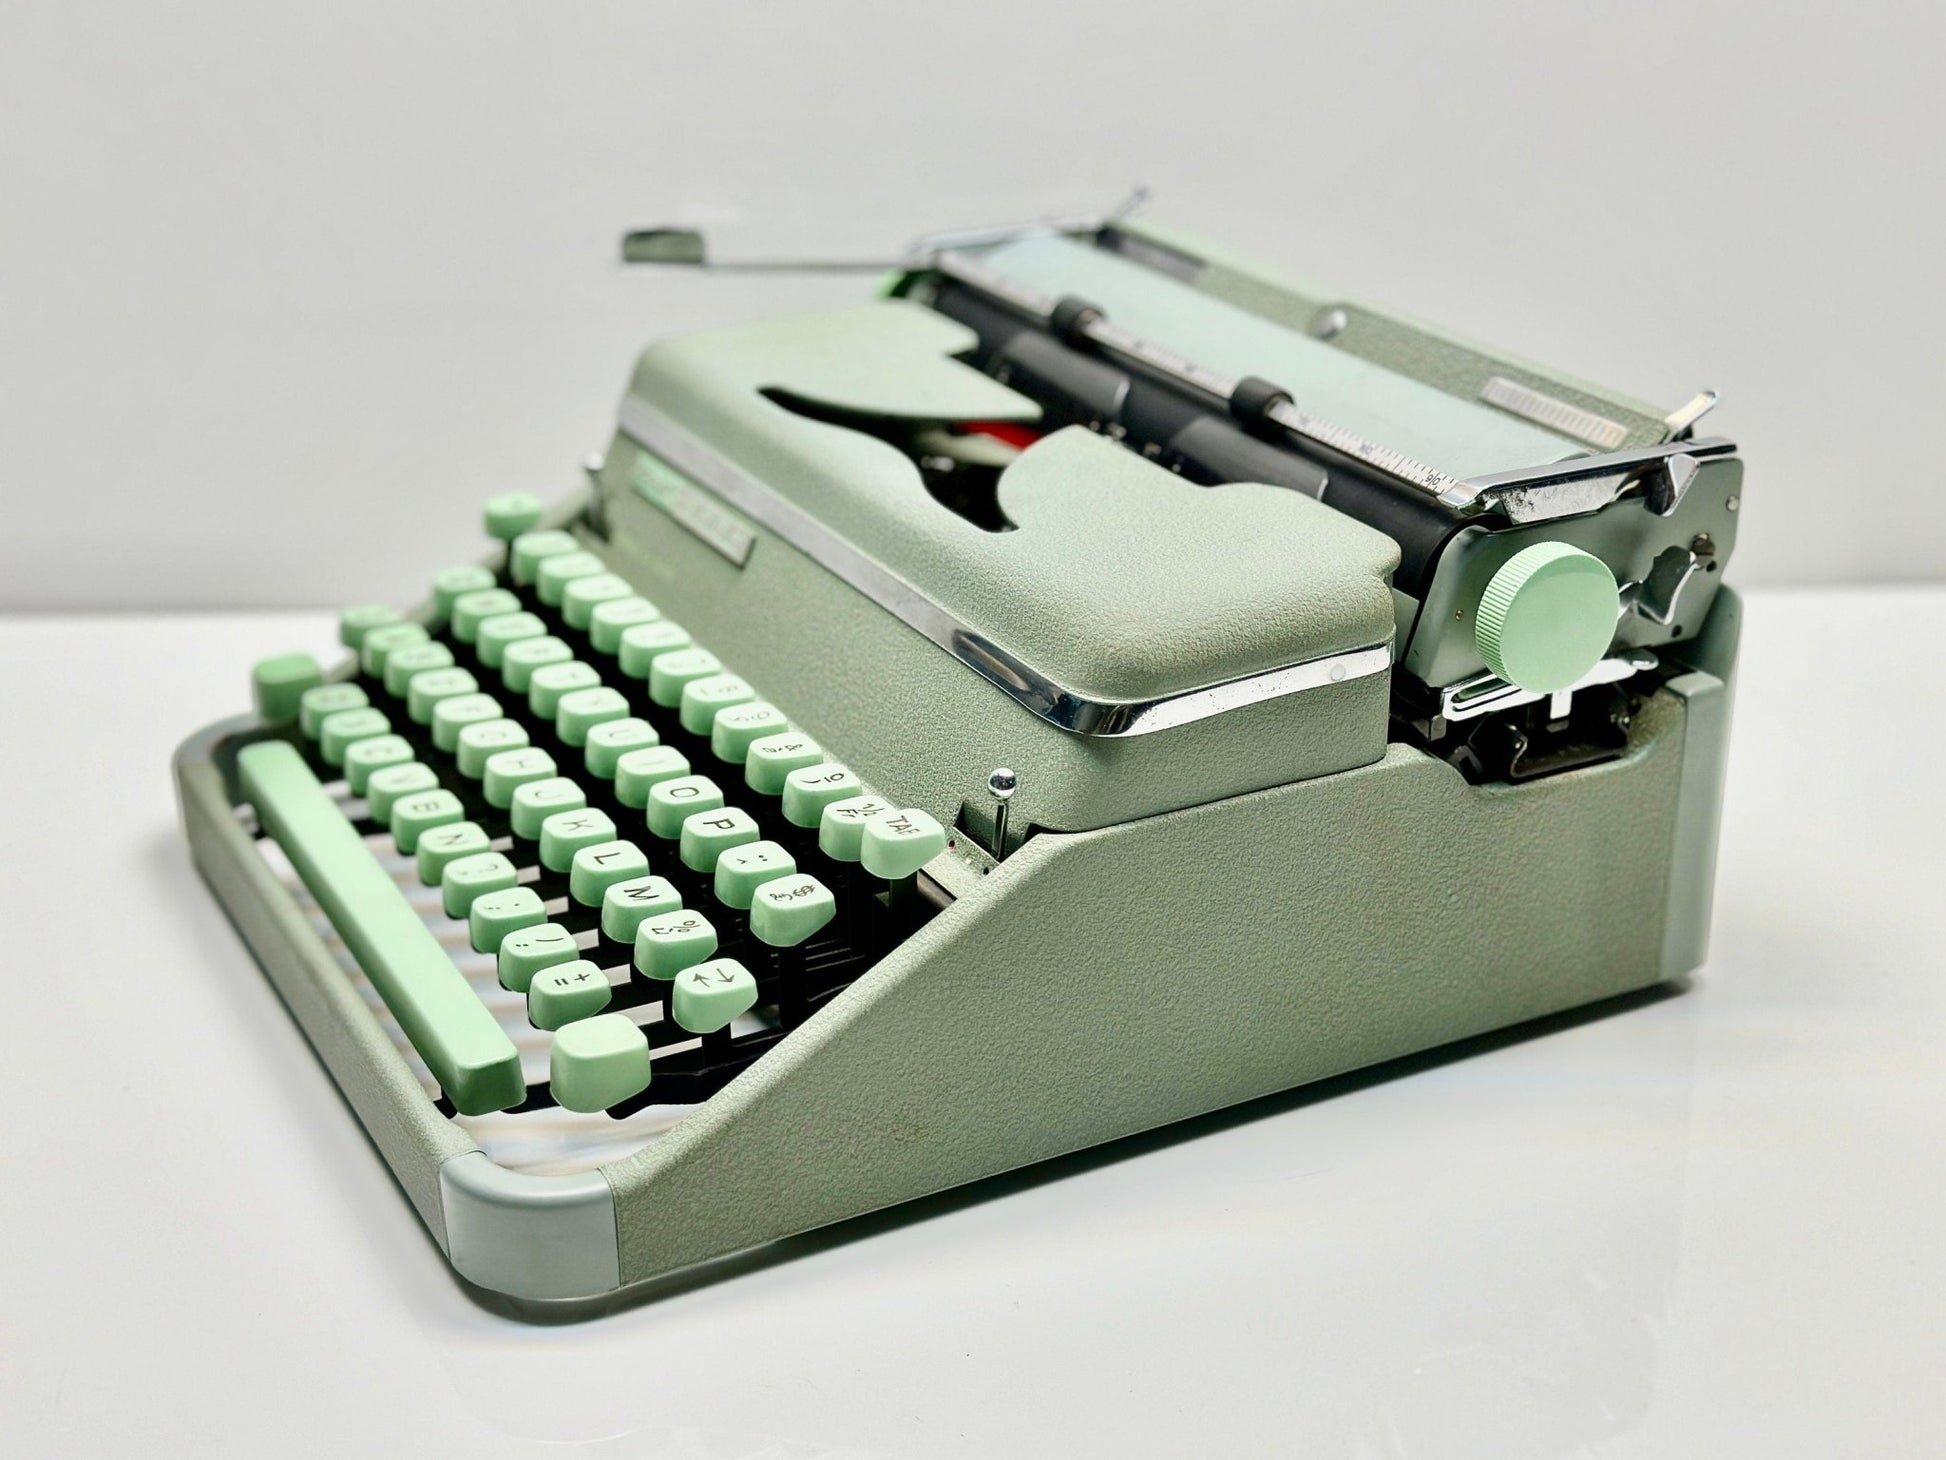 Hermes 2000 Green Typewriter - A Special and Best Gift, Superior Craftsmanship, Green Keyboard, Warranty Included